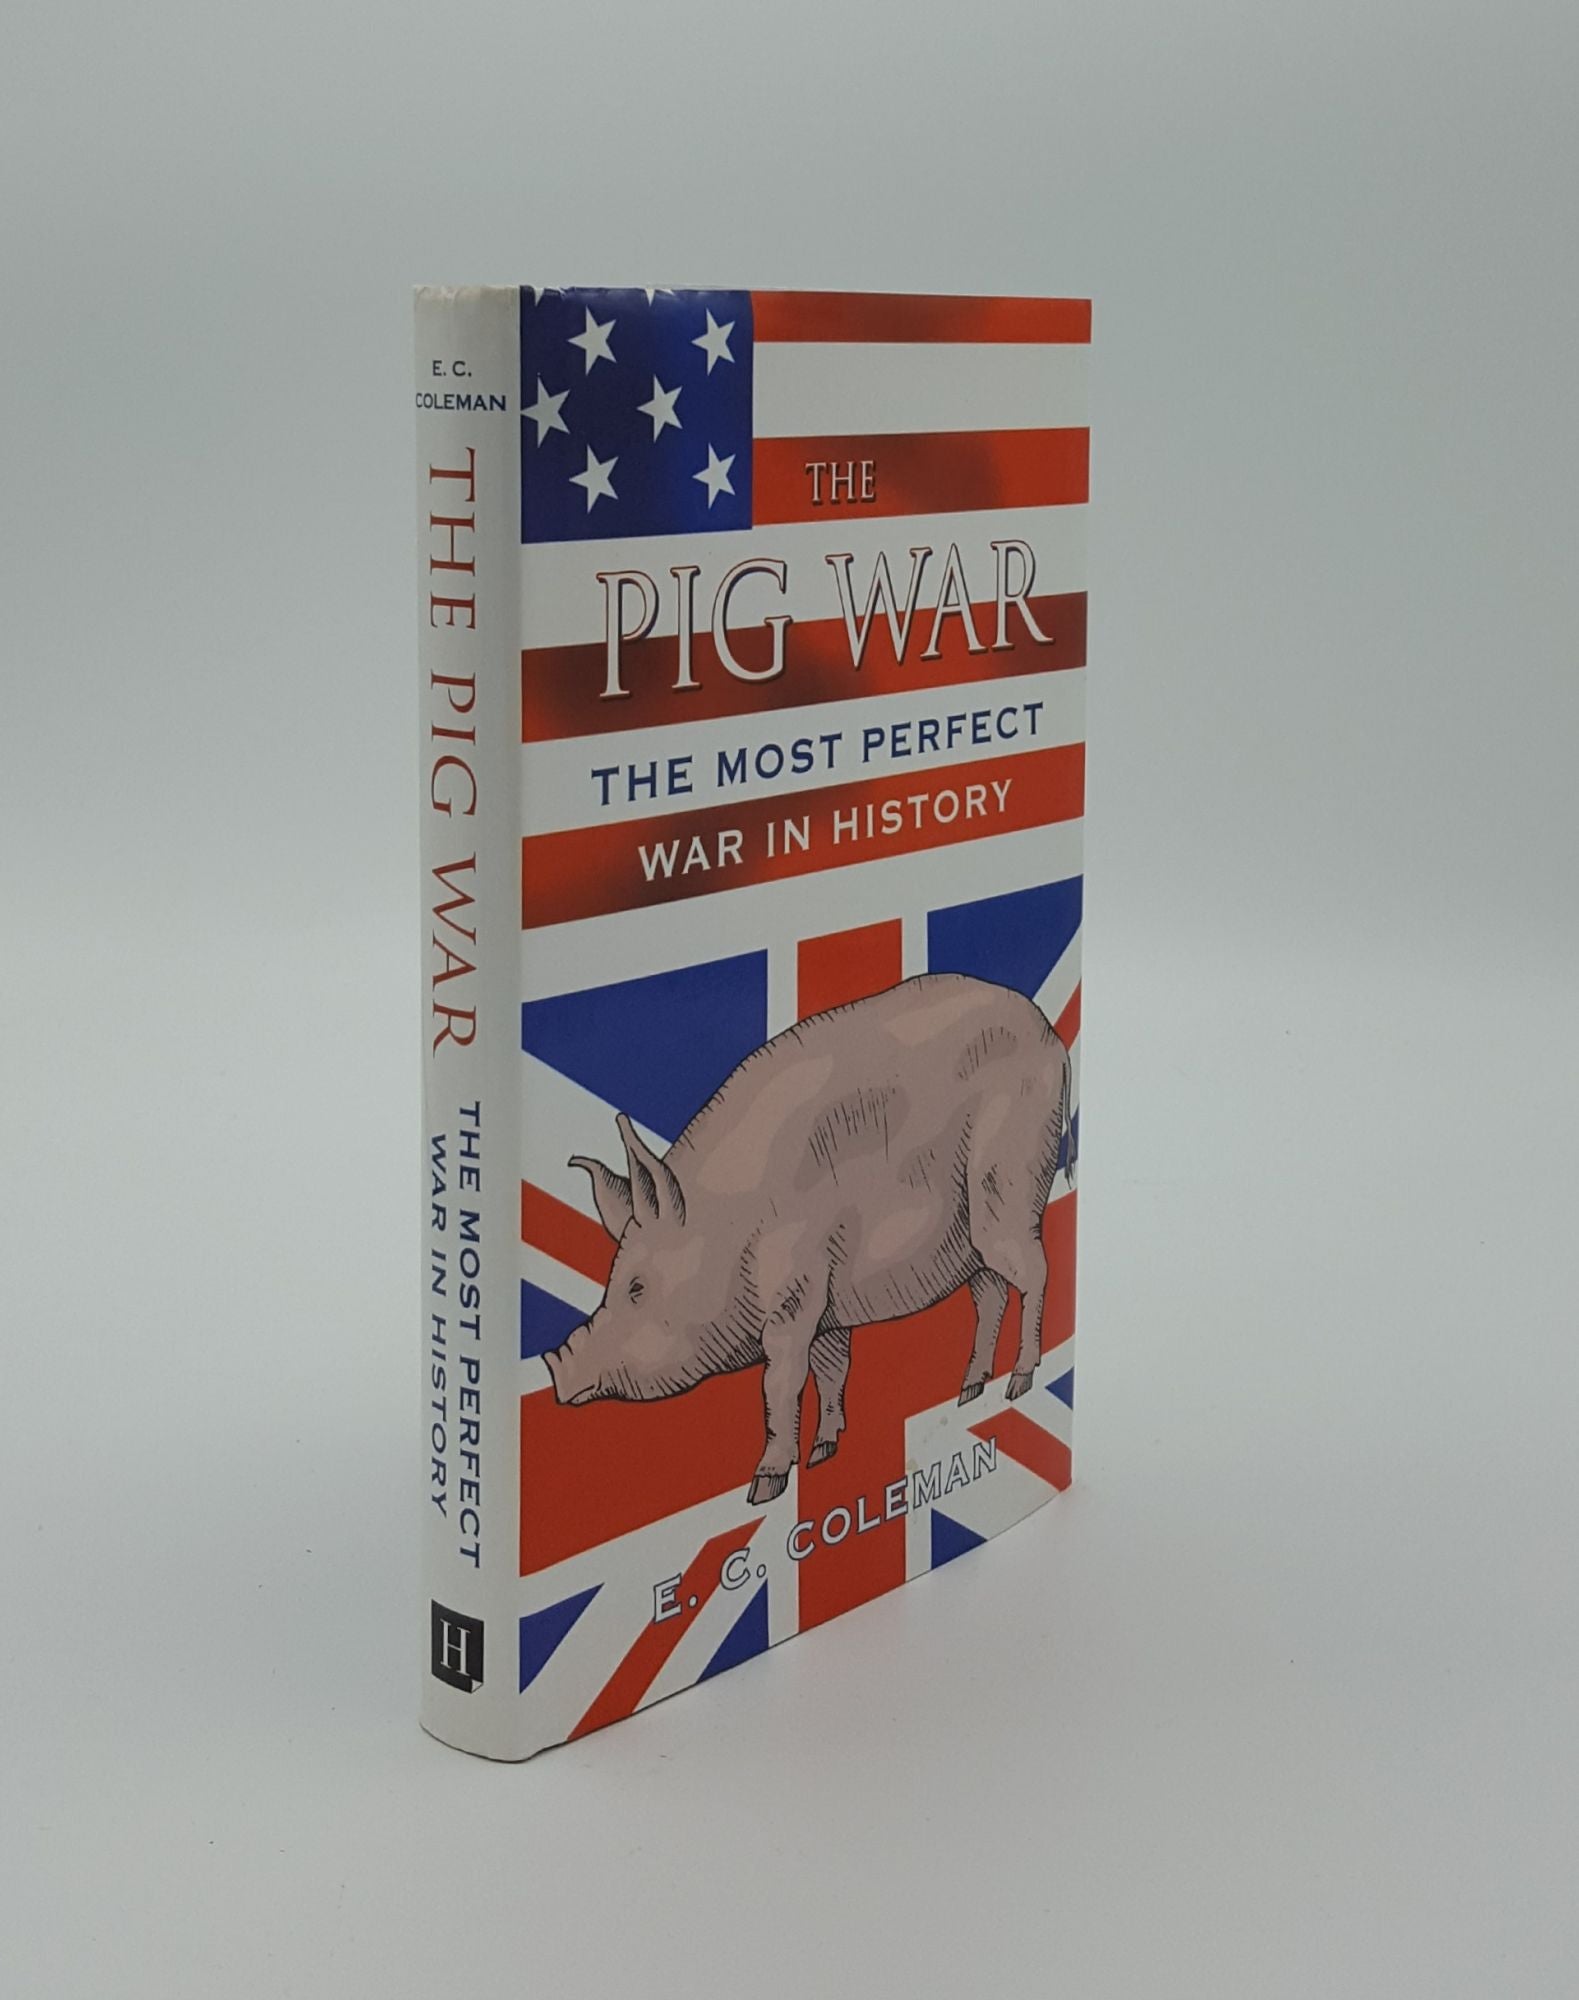 COLEMAN E.C. - The Pig War the Most Perfect War in History